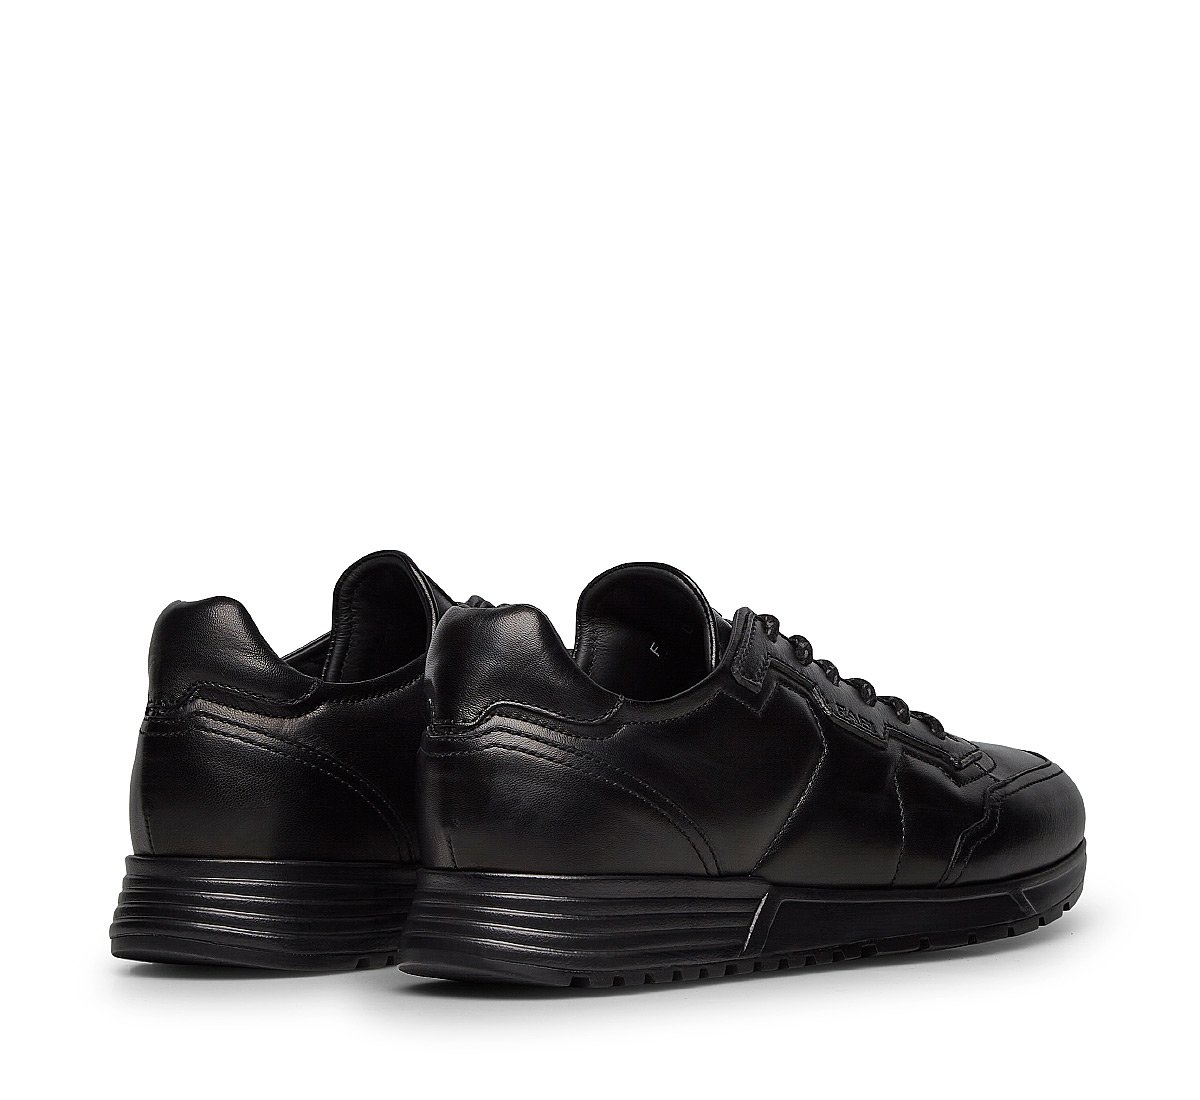 Sneaker in soft nappa leather